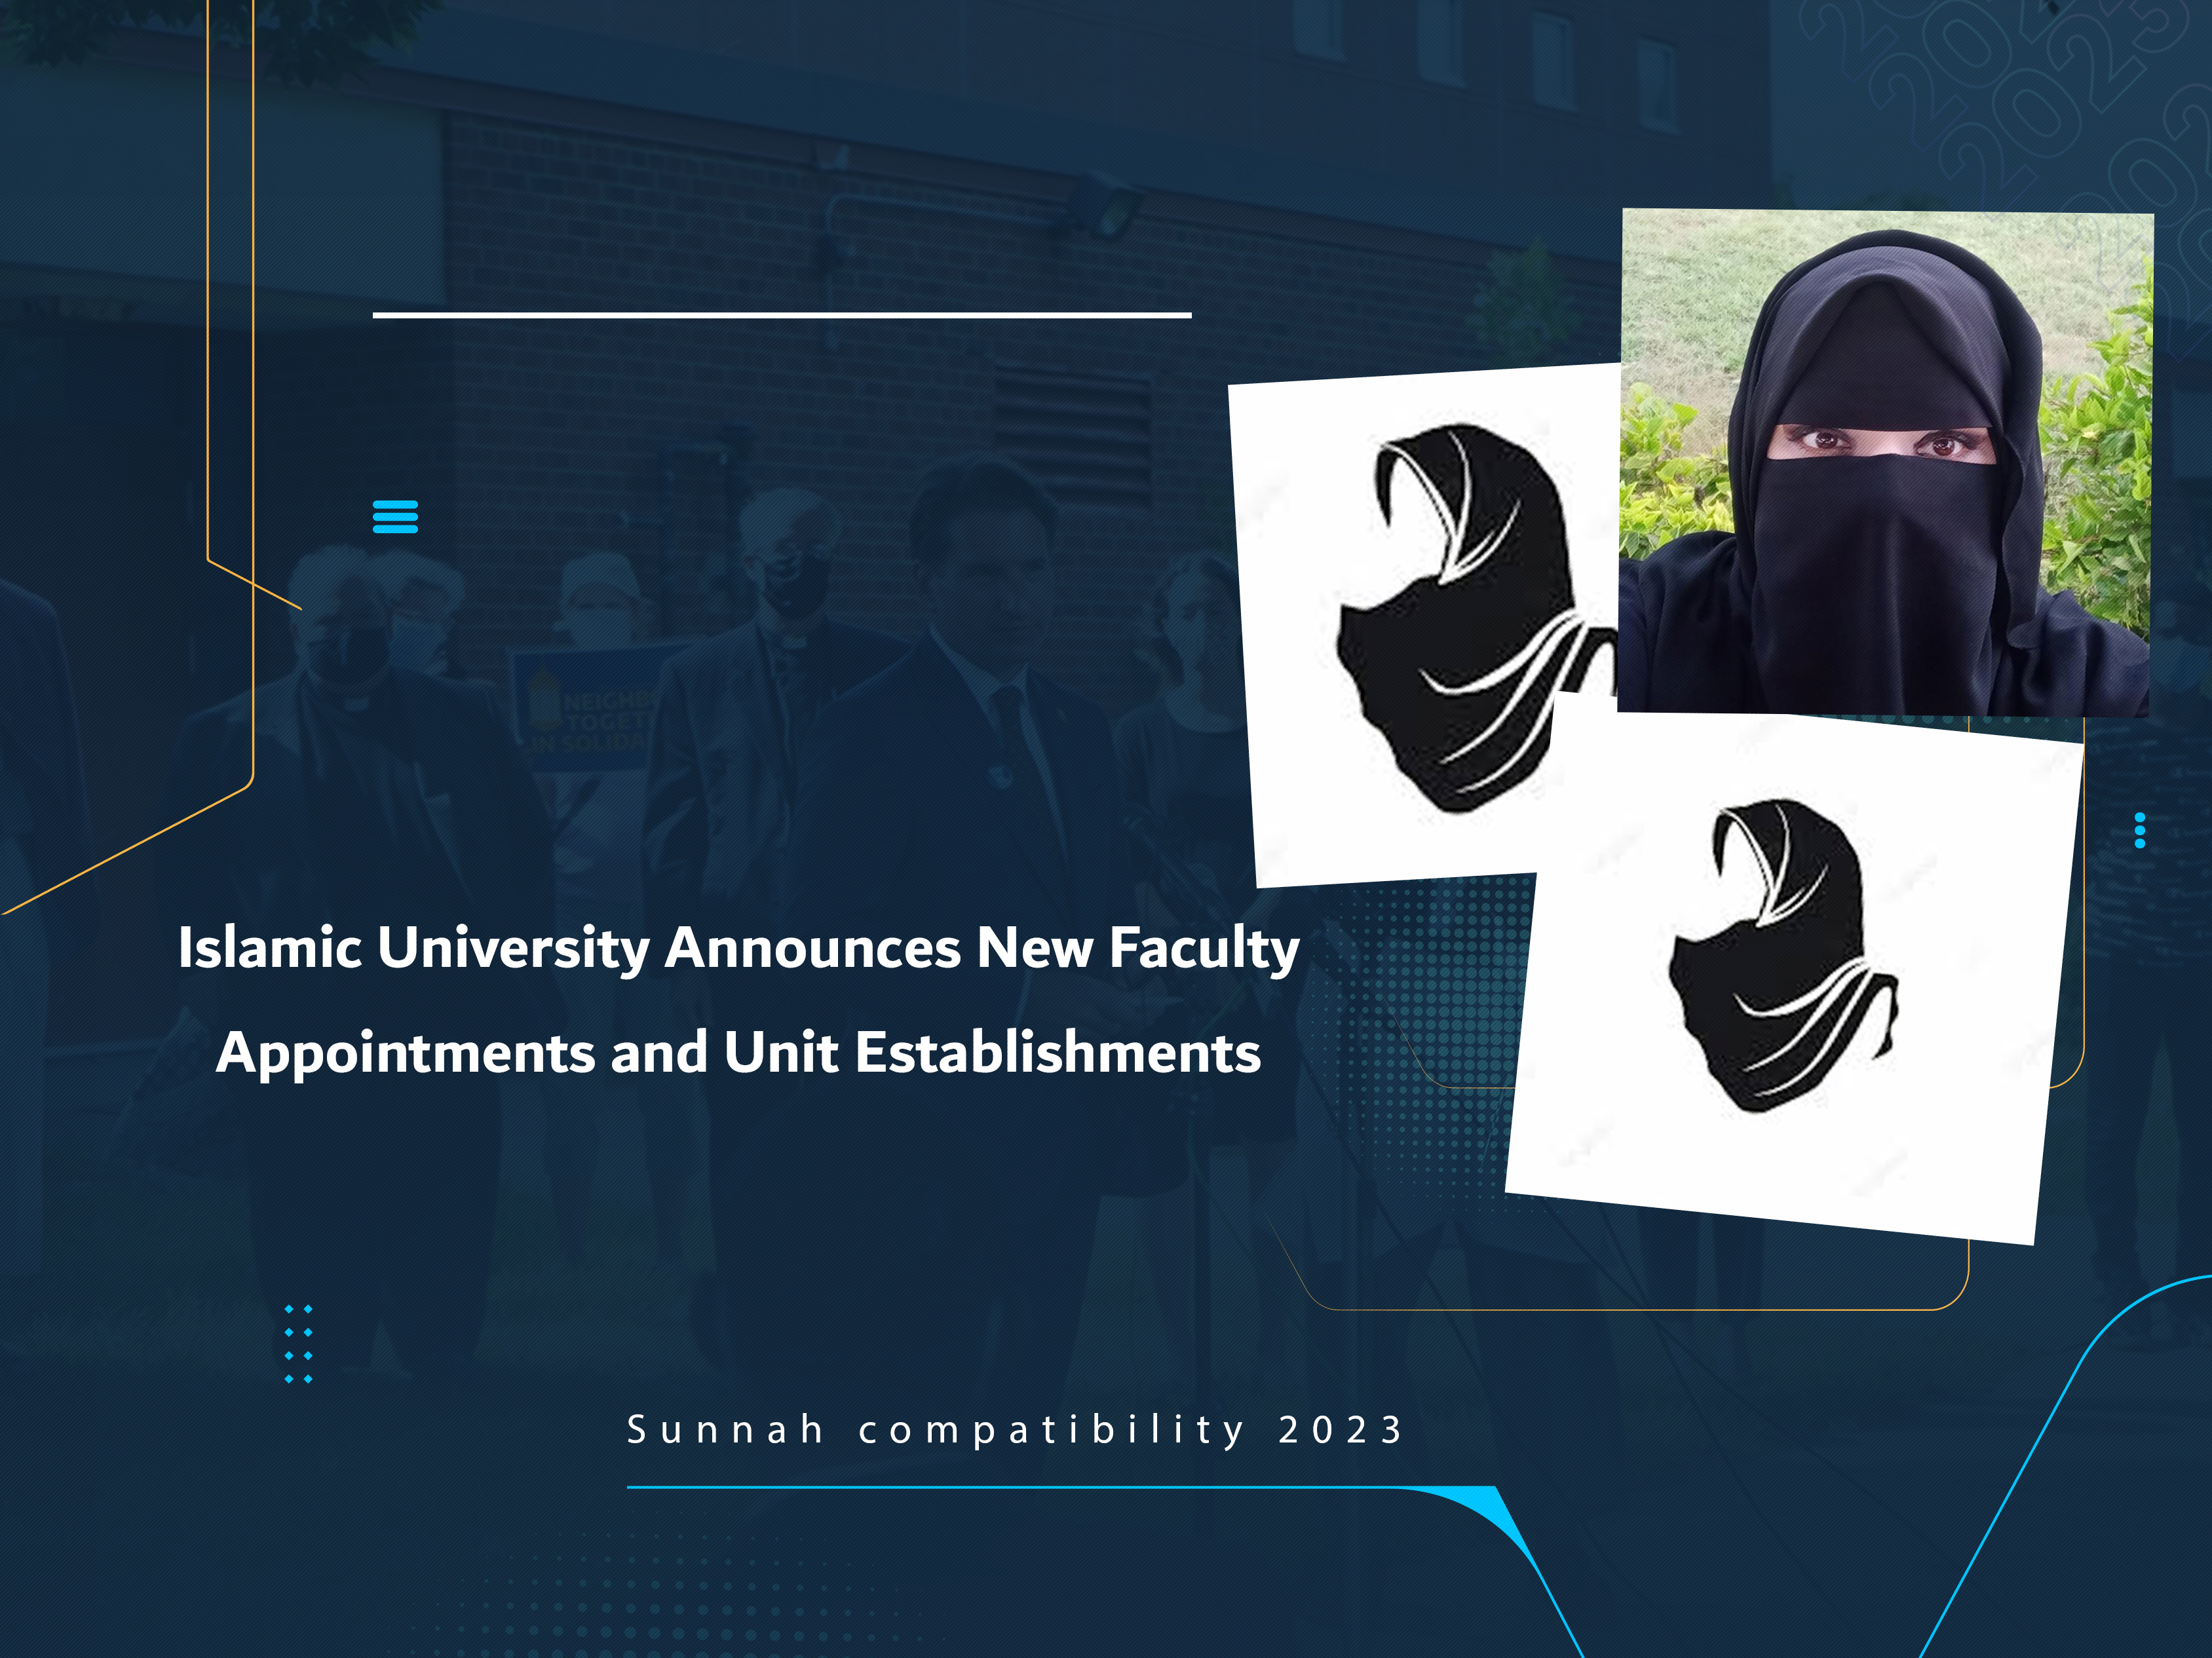 Islamic University Announces New Faculty Appointments and Unit Establishments